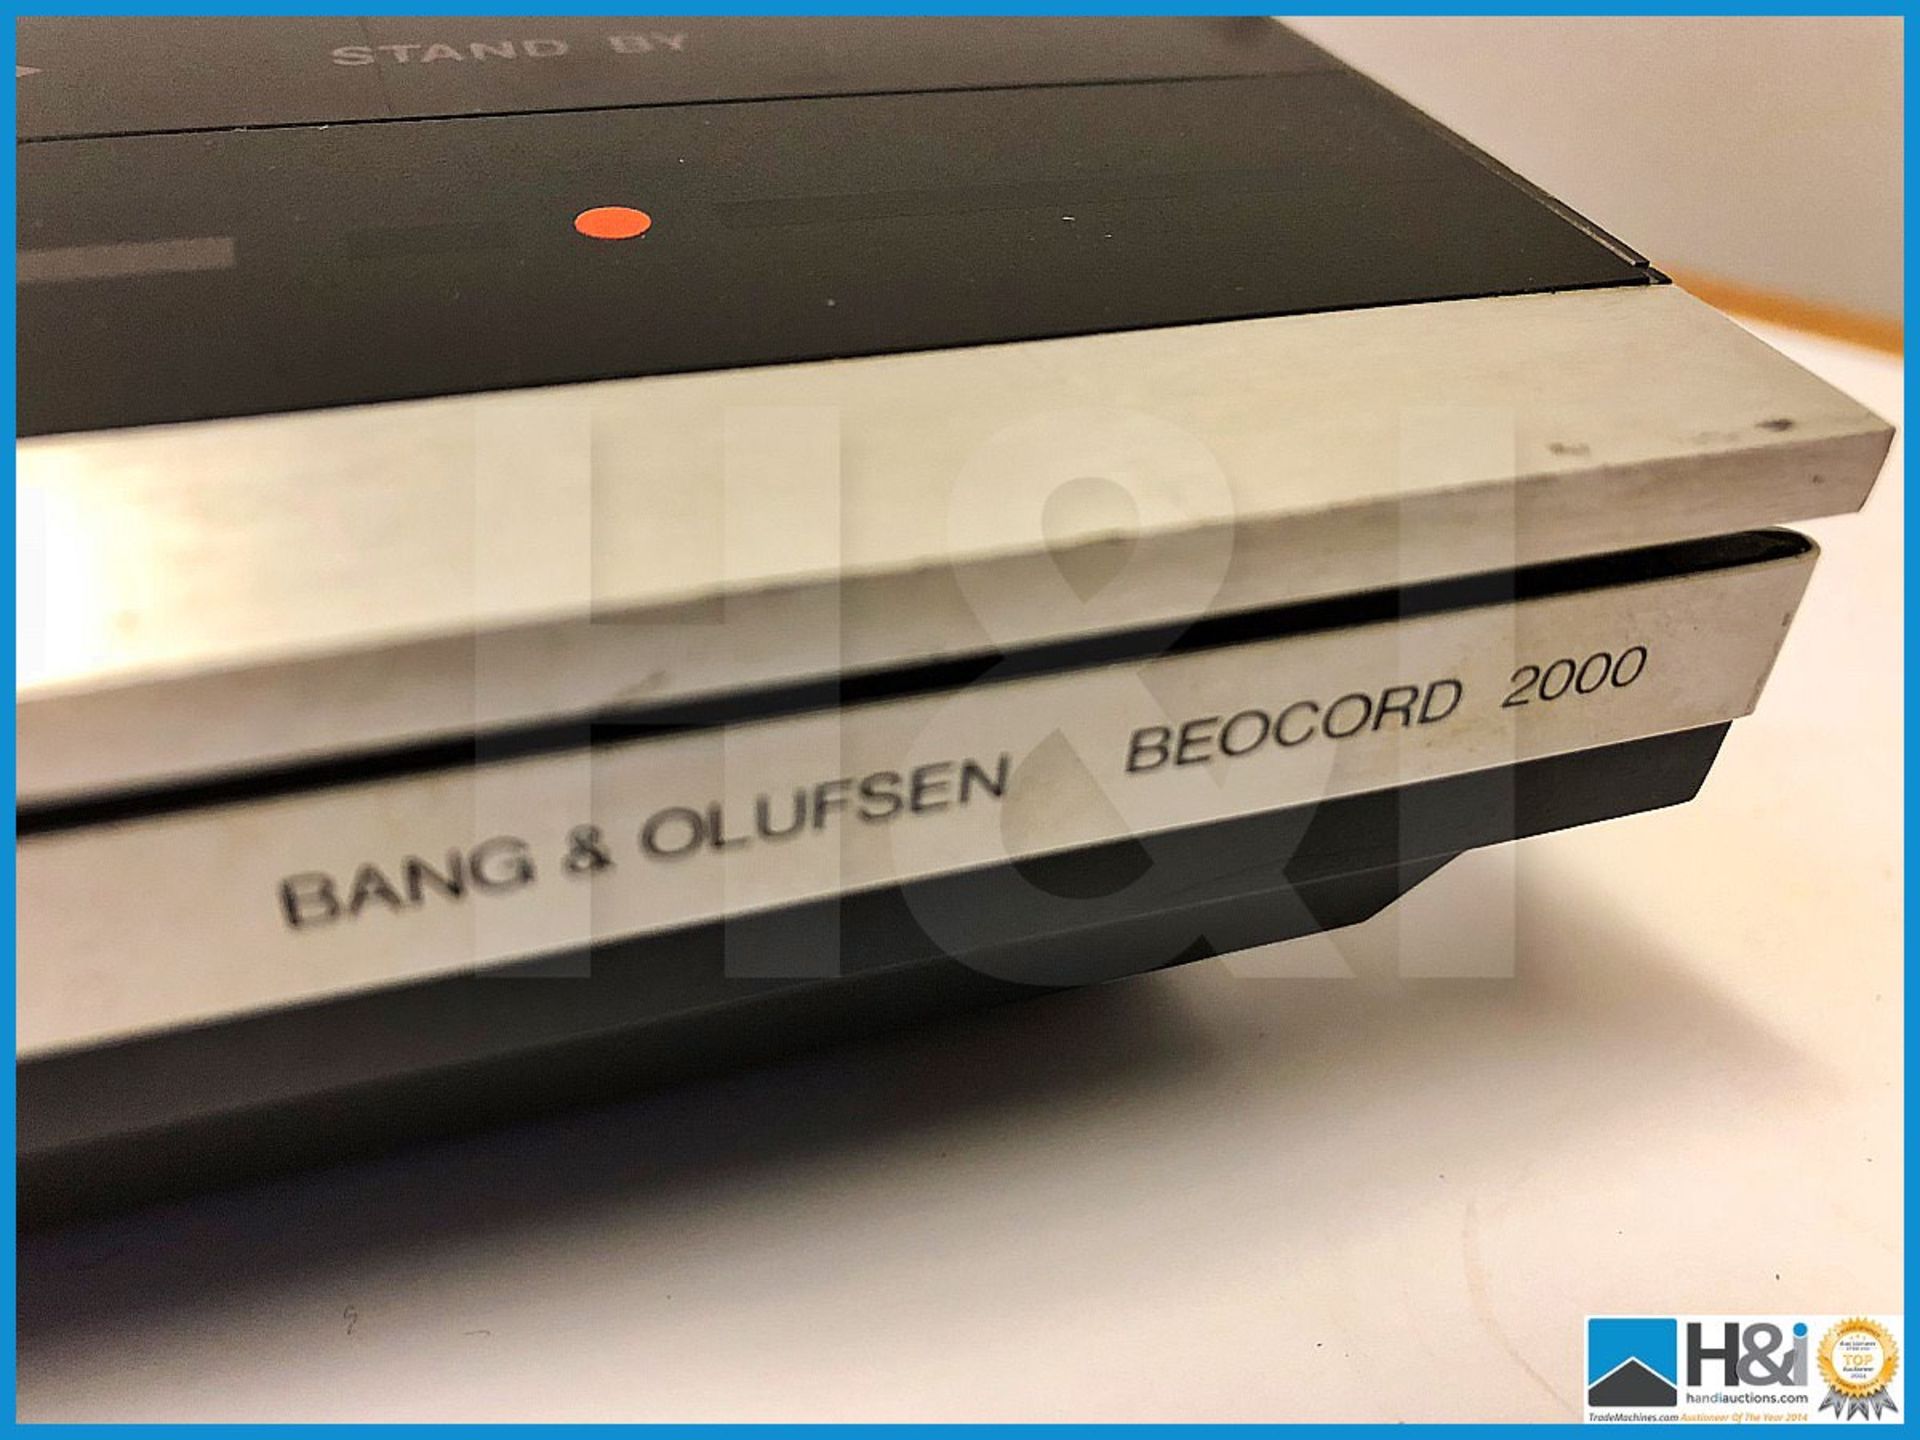 Bang & Olufsen Beocord 2000 cassette player - Image 5 of 7